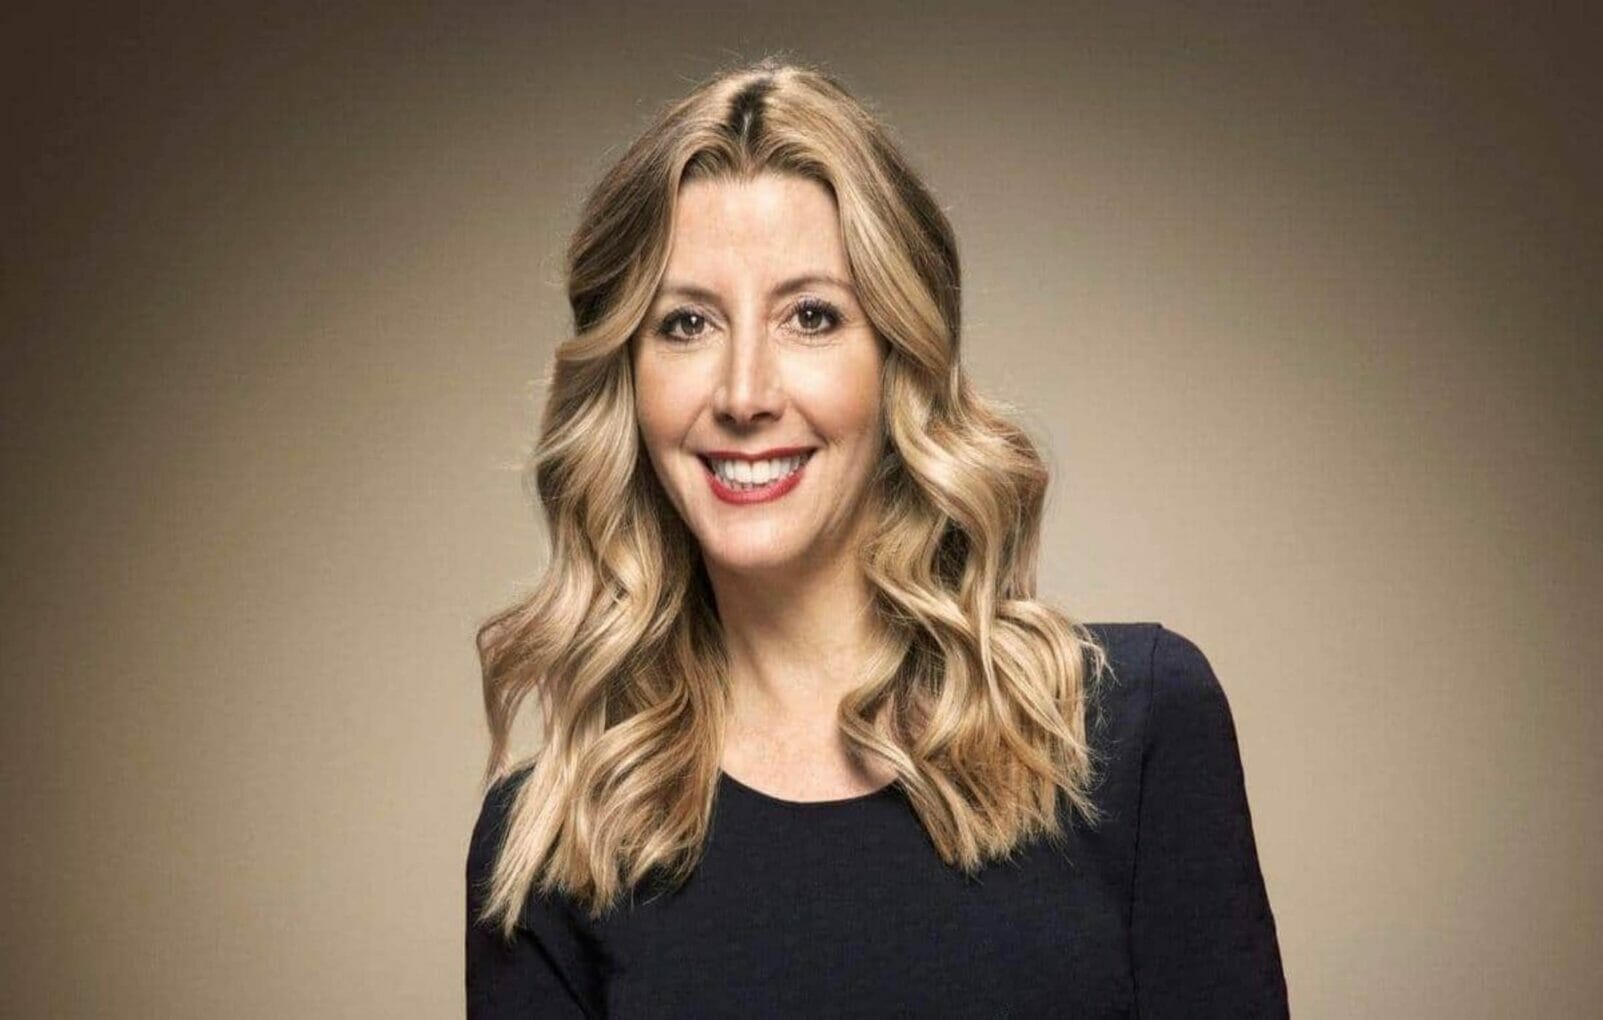 Sara Blakely Spanx net worth, age, wiki, family, biography and latest